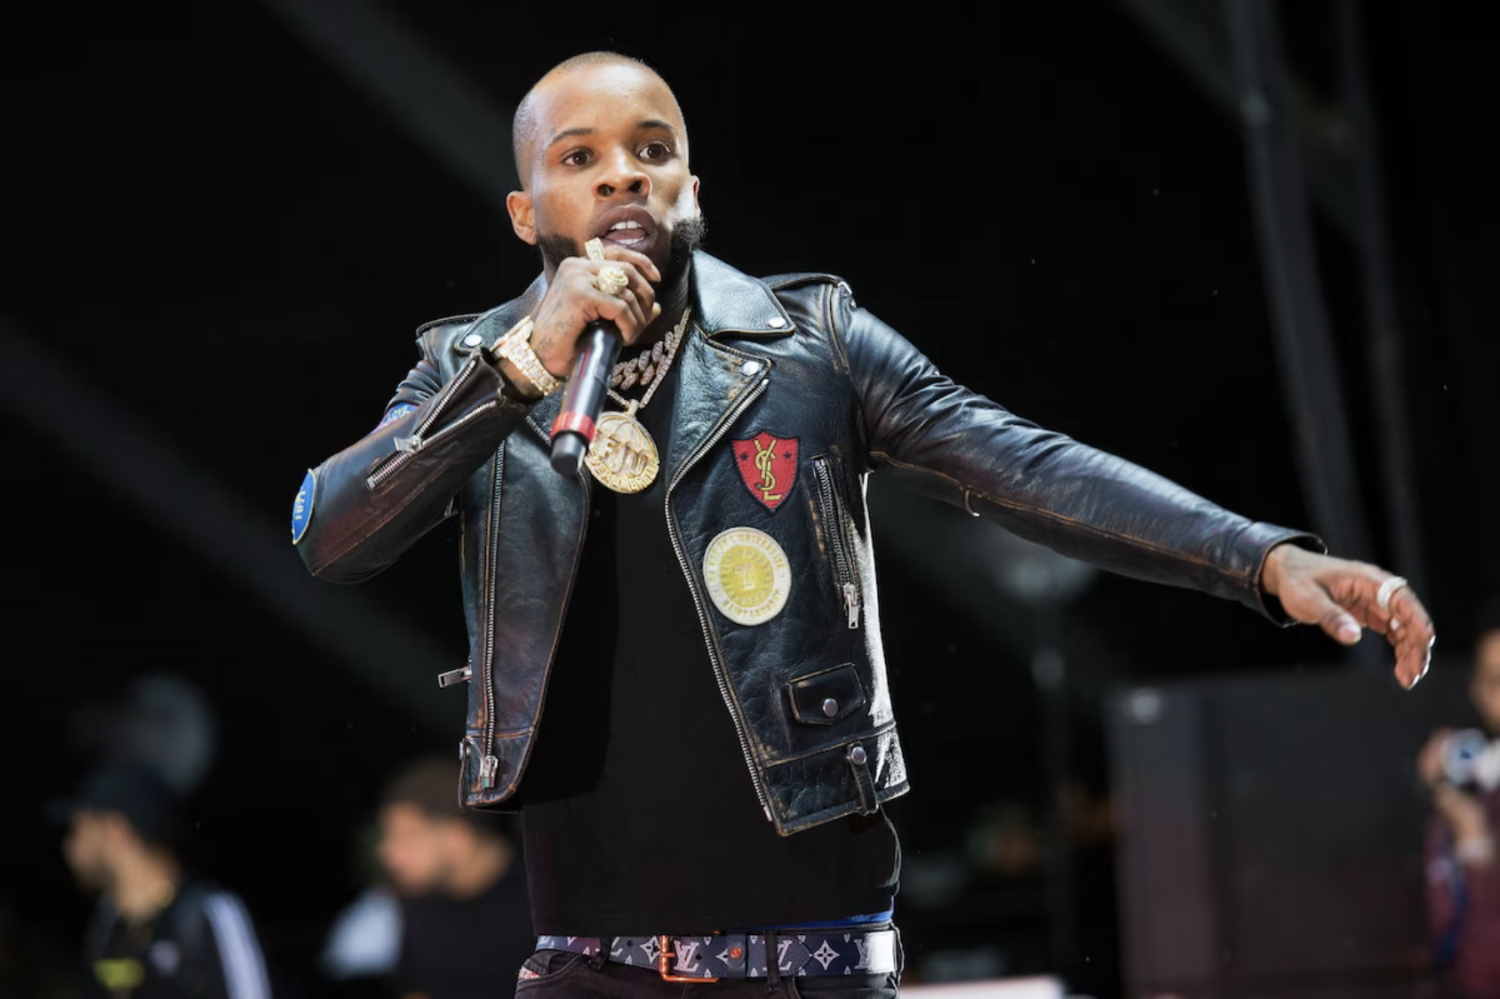 Rapper Tory Lanez performs in 2018 at MetLife Stadium in East Rutherford, N.J. He was convicted last year of shooting hip-hop star Megan Thee Stallion in 2020. (Scott Roth/Invision/AP)